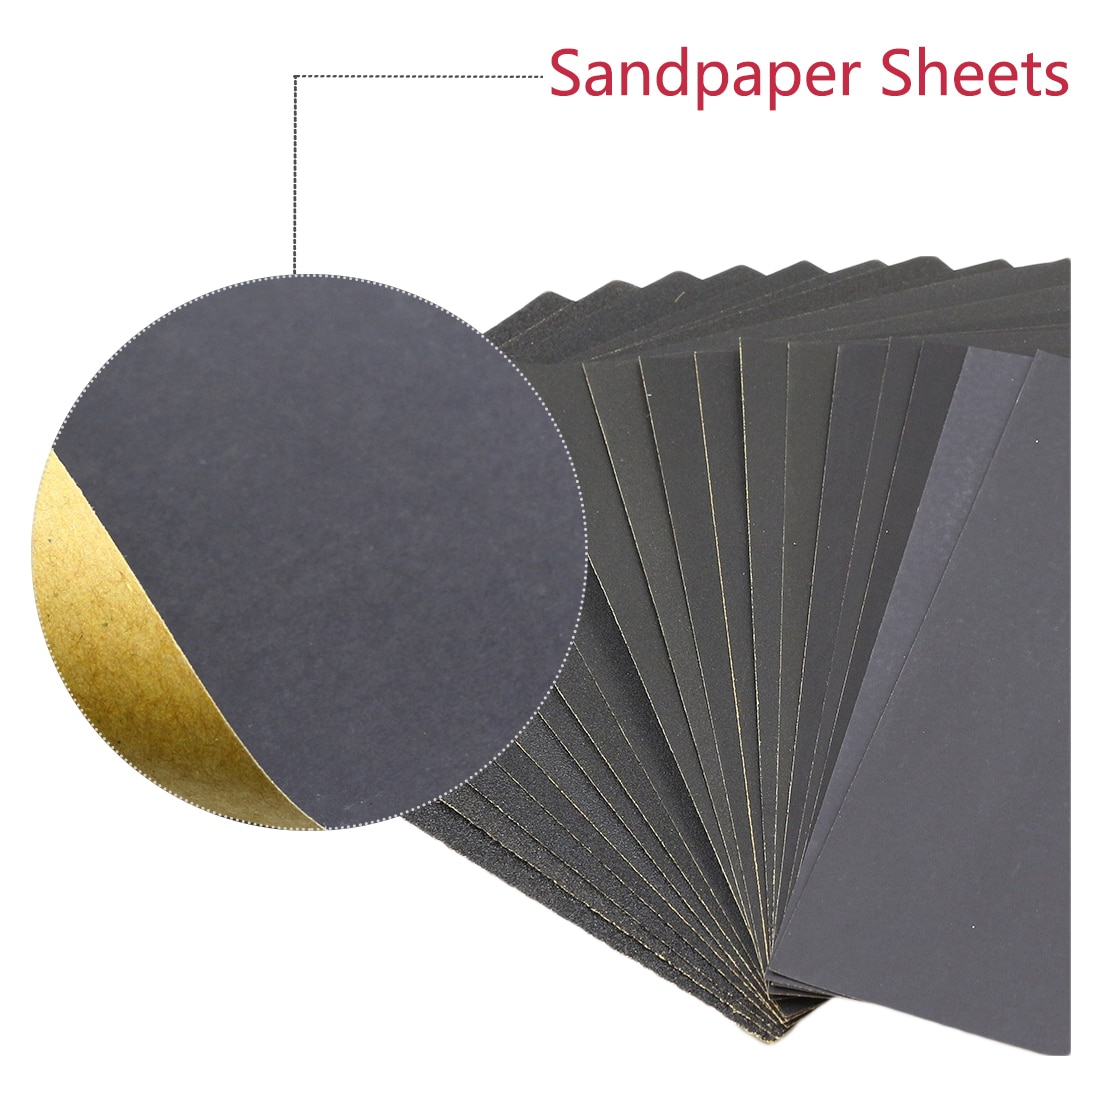 Grit 3000 5000 7000 Wet and Dry Sandpaper Polishing Abrasive Waterproof Paper Sheets 230*280mm